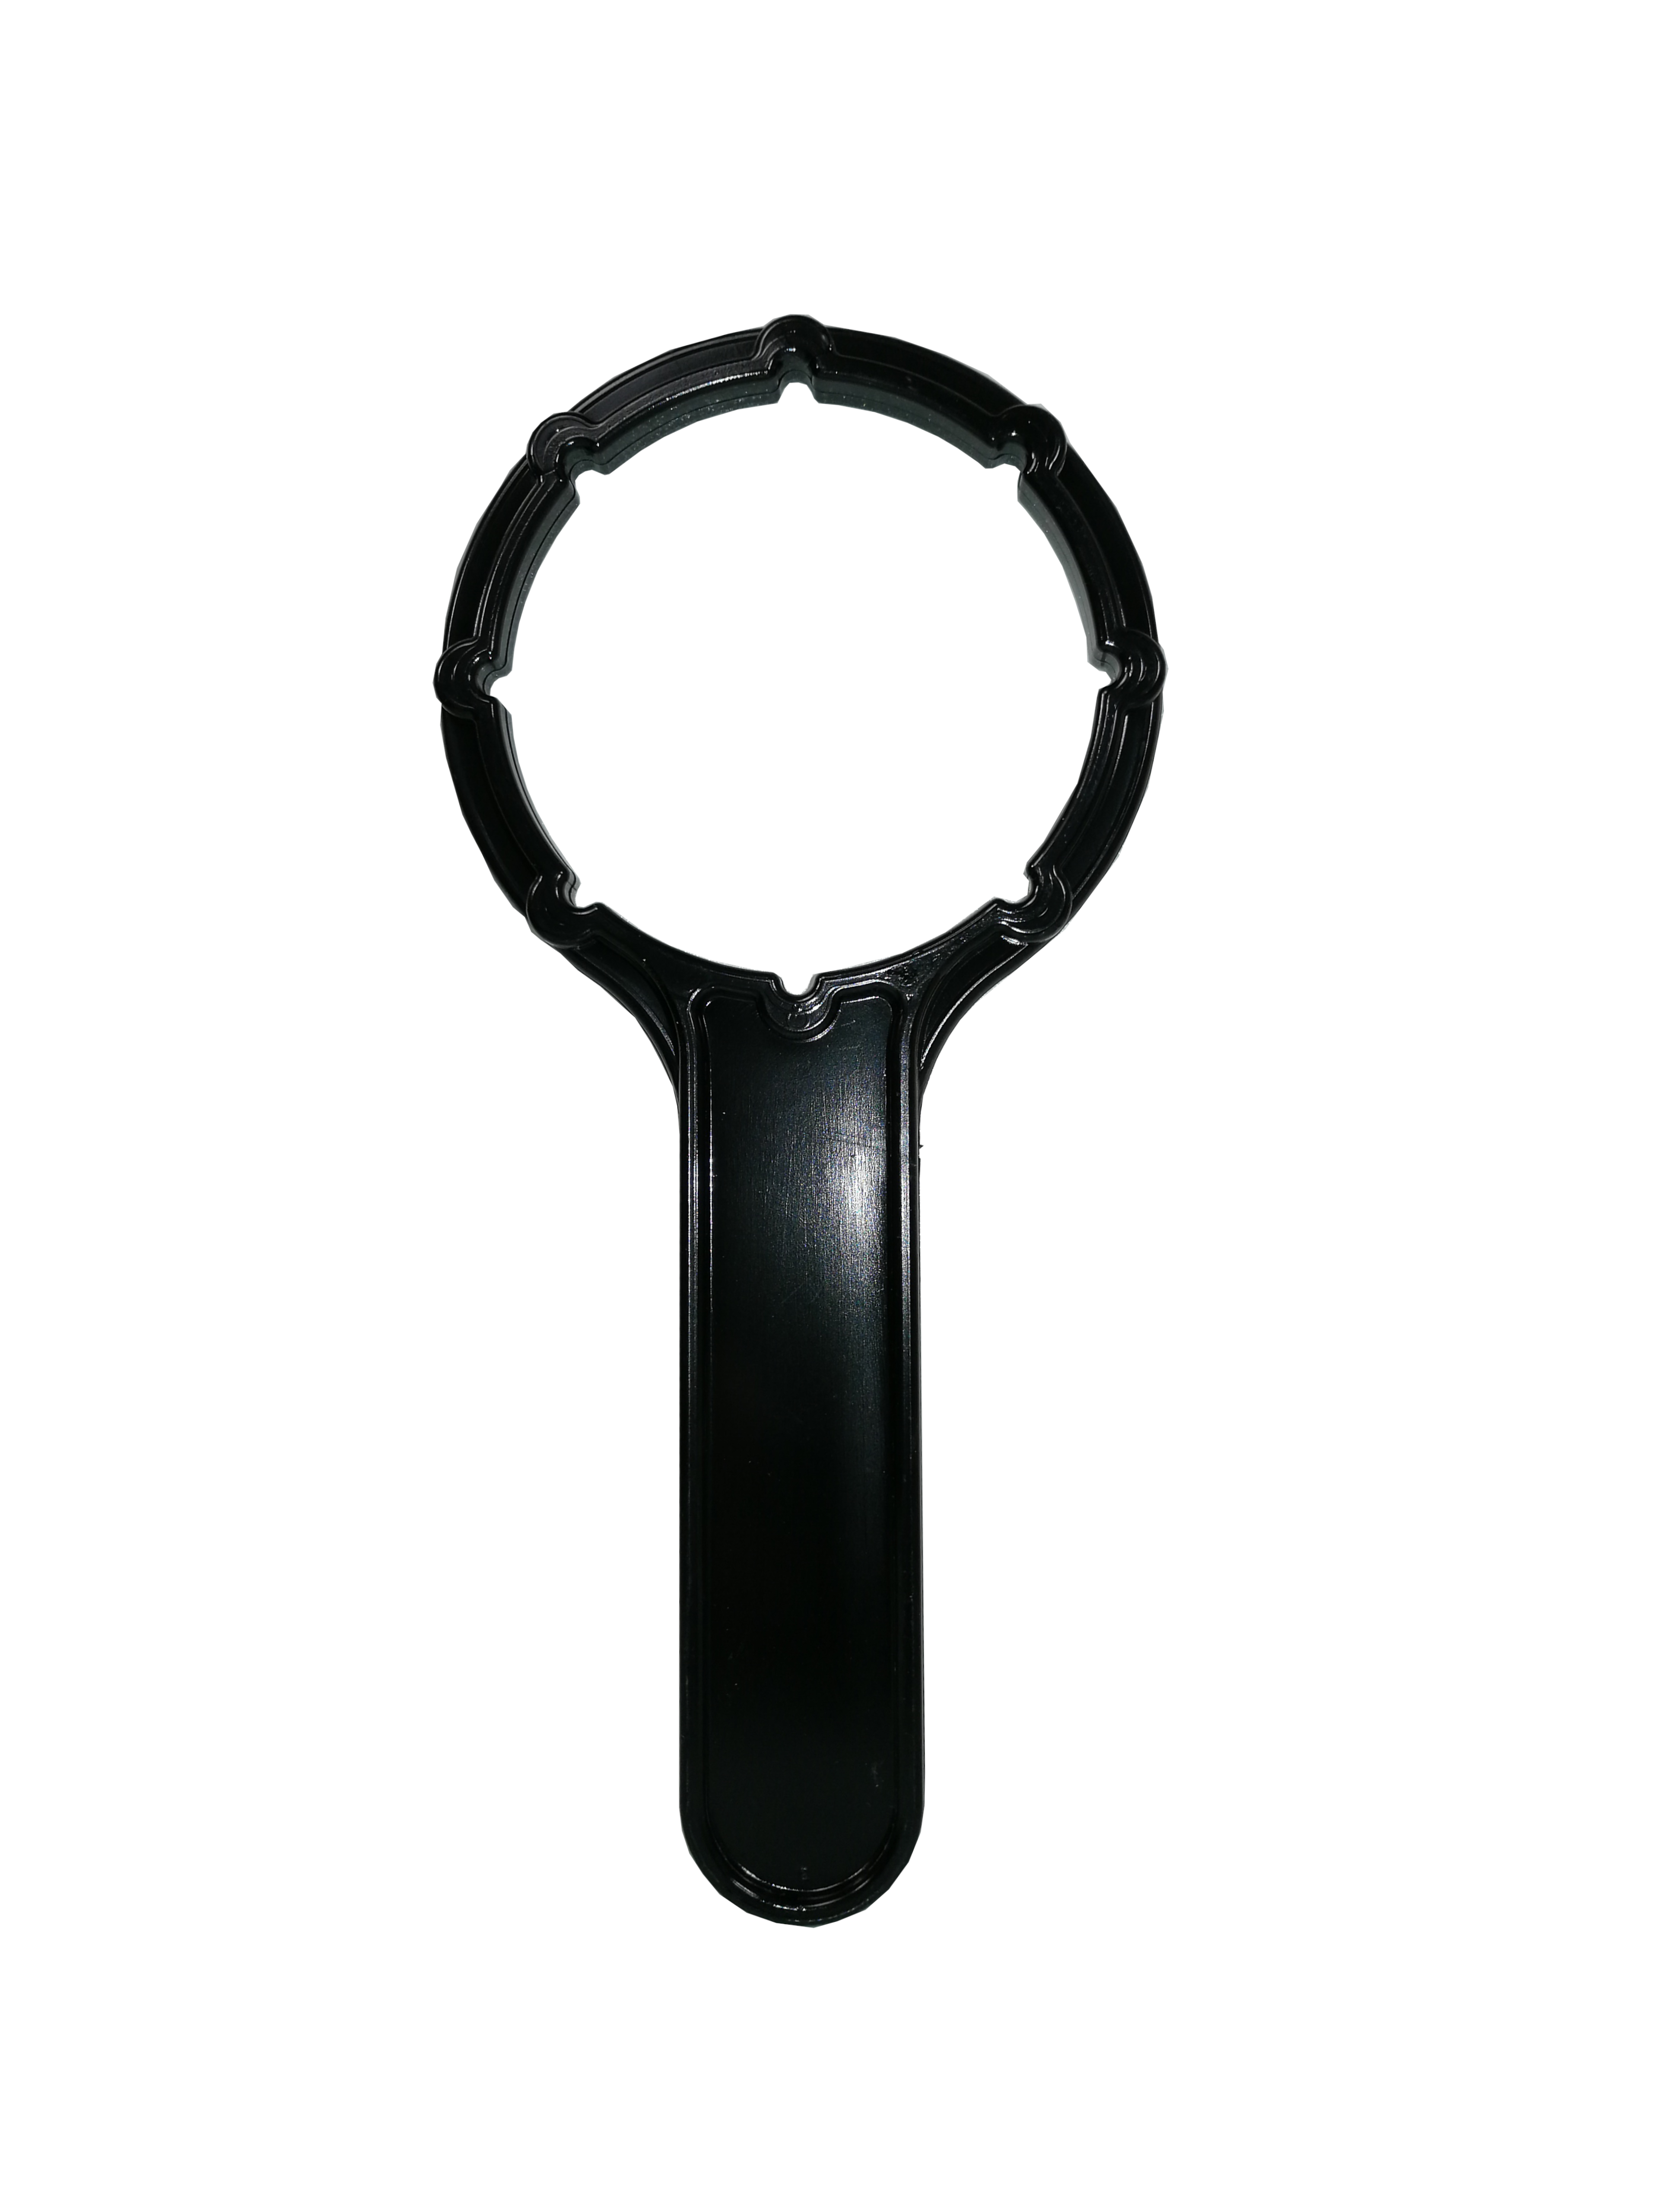 POLAR bowl wrench for FIL34 UNO and FIL34 DUO filters